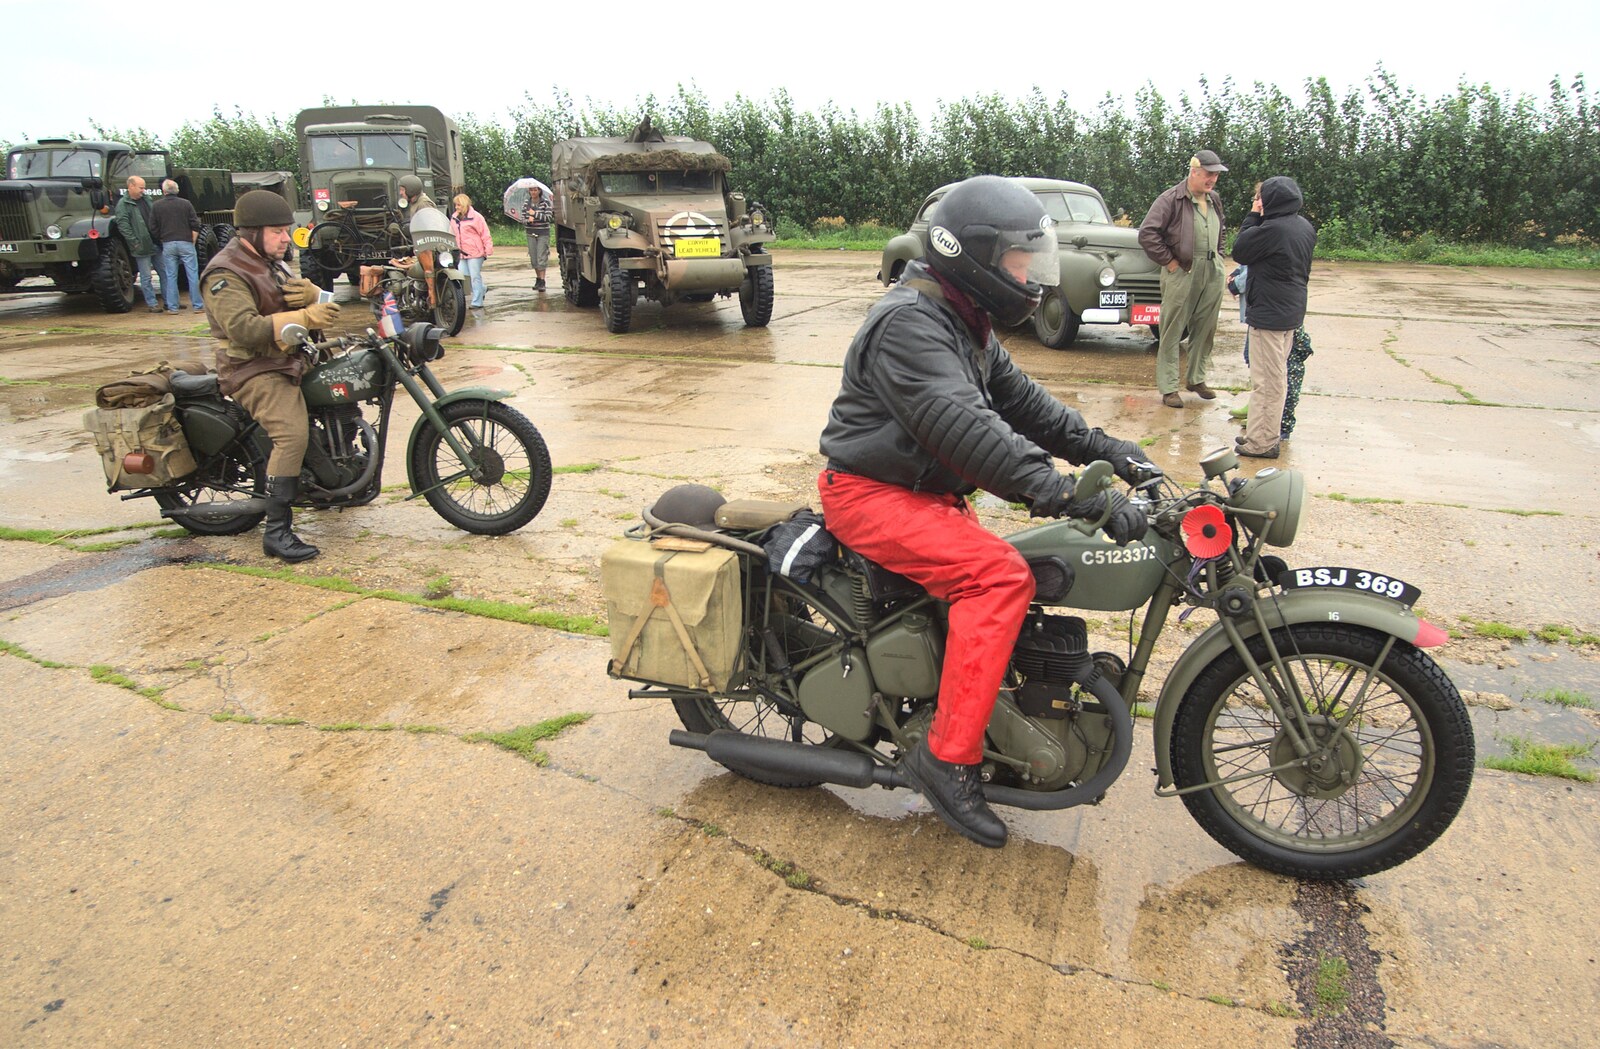 Motorbikes mill around from Clive's Military Vehicle Convoy, Brome Aerodrome, Suffolk - 16th July 2011